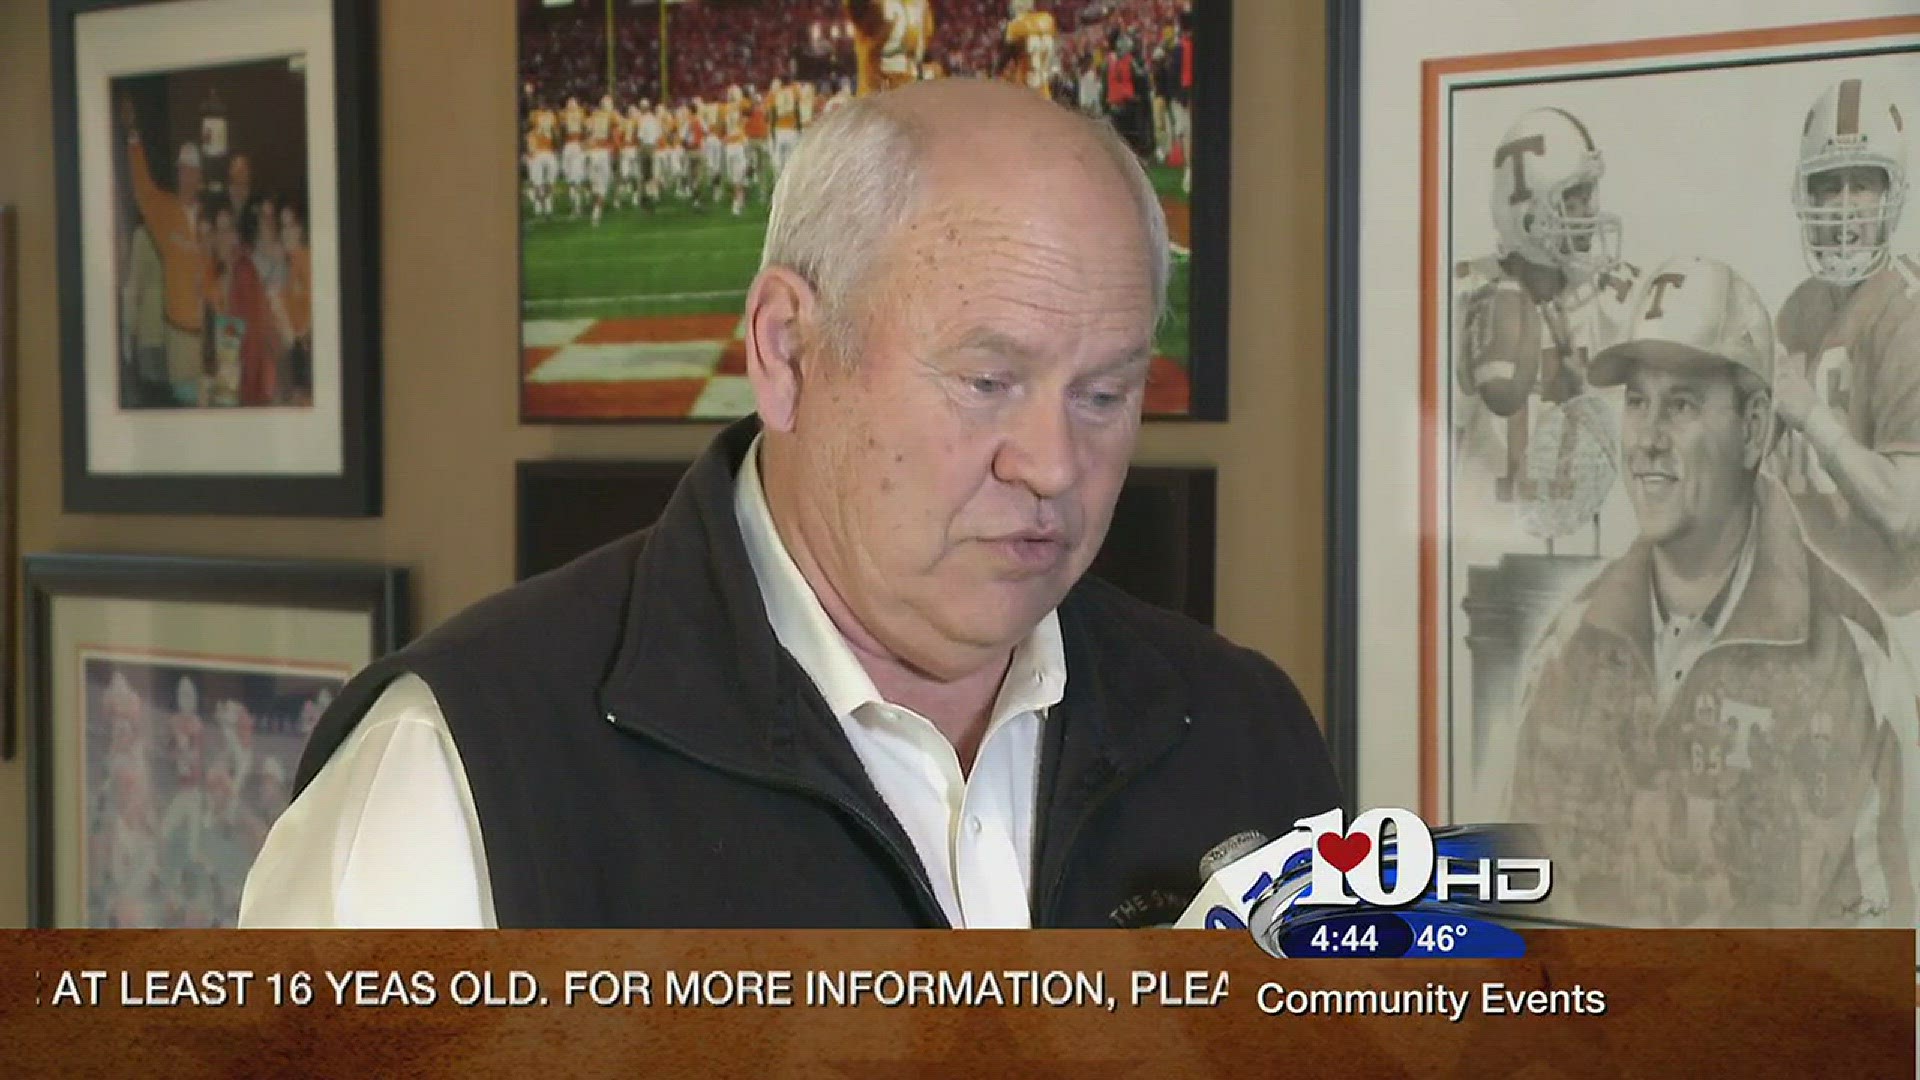 Beth Haynes talked with the former UT Football Coach about the Super Bowl and more